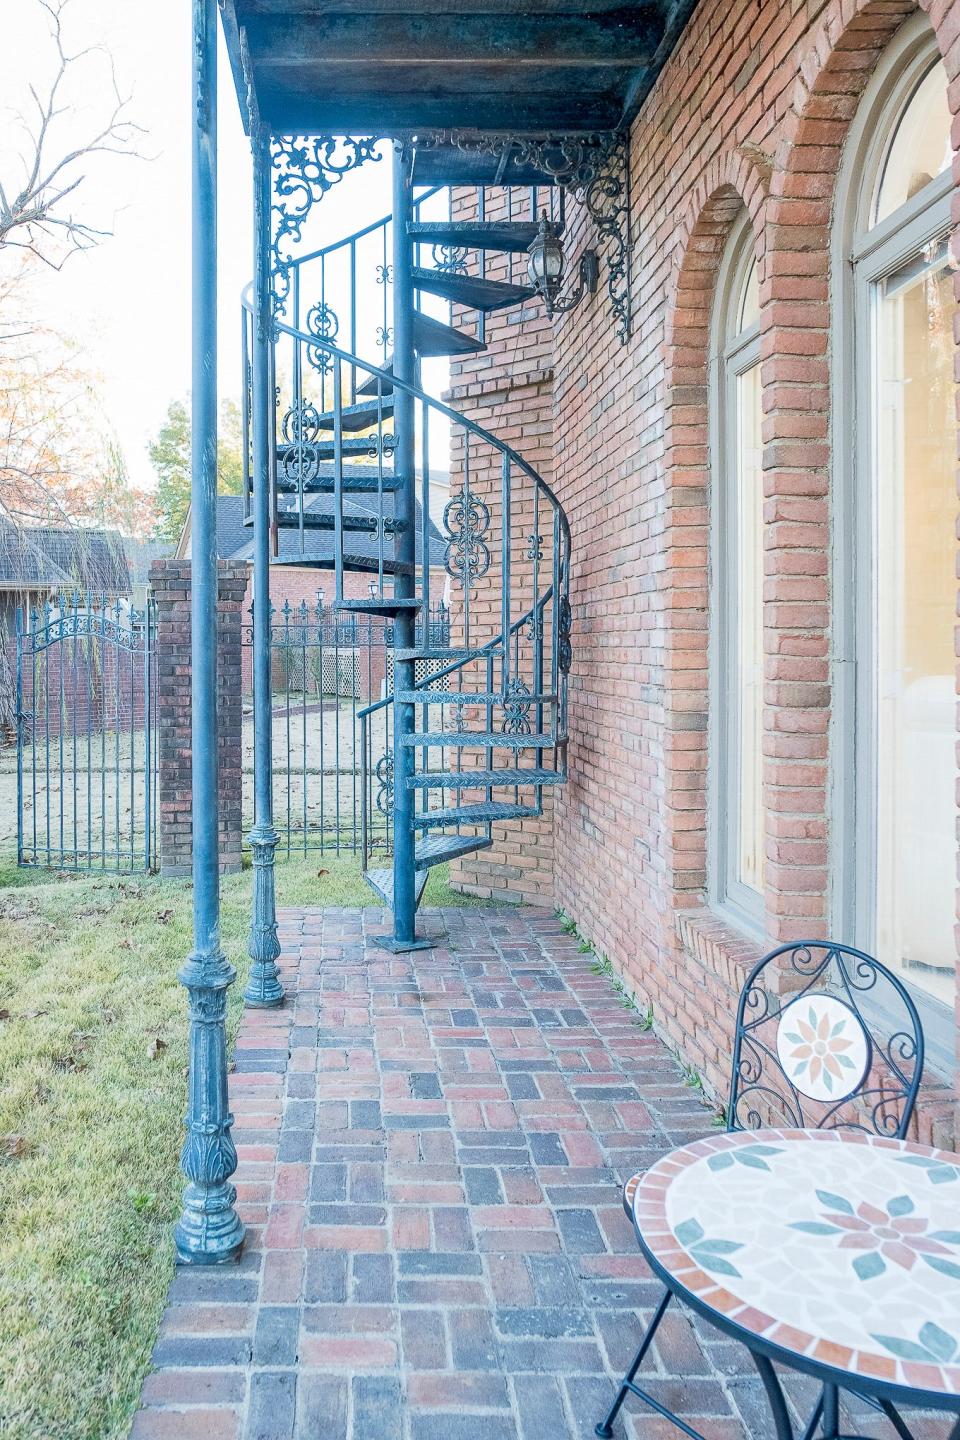 A circular staircase gives additional access to the patio seating area in the backyard.